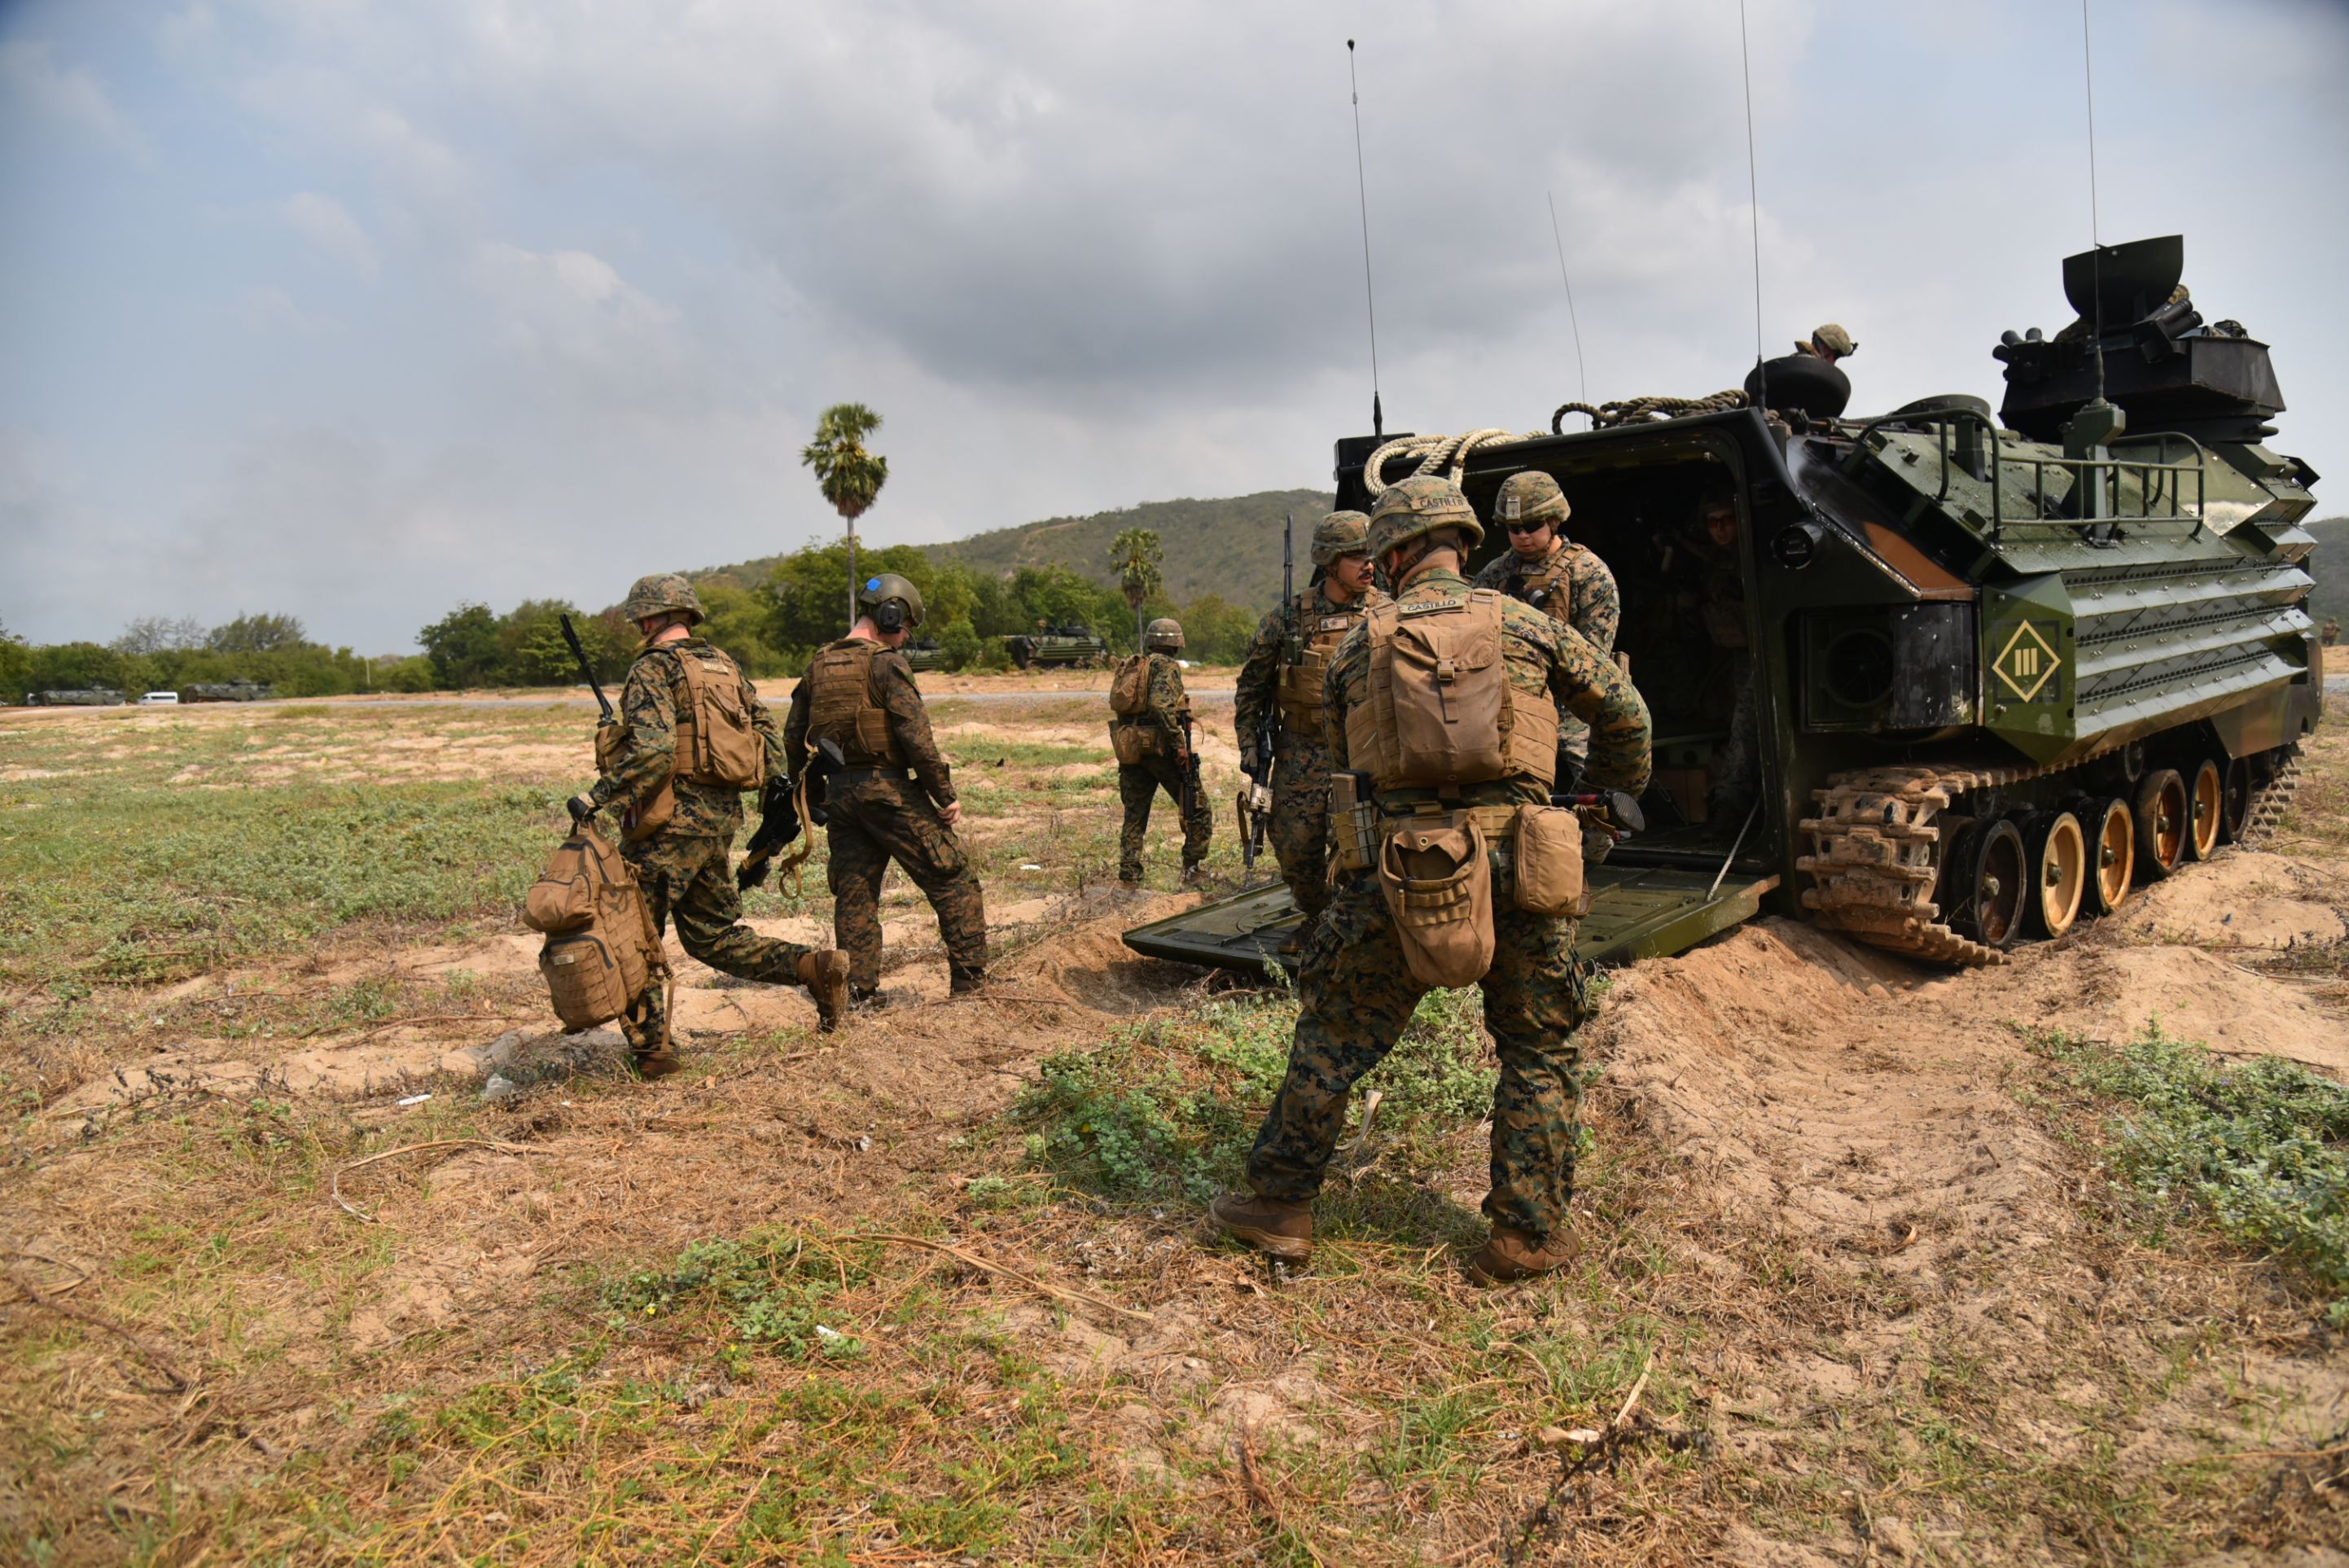 Sattahip, Thailand - 27 February 2020 : U.S. Marines participate in an amphibious assault exercise as part of the "Cobra Gold 2020" (CG20) joint military exercise at a military base in Chonburi.